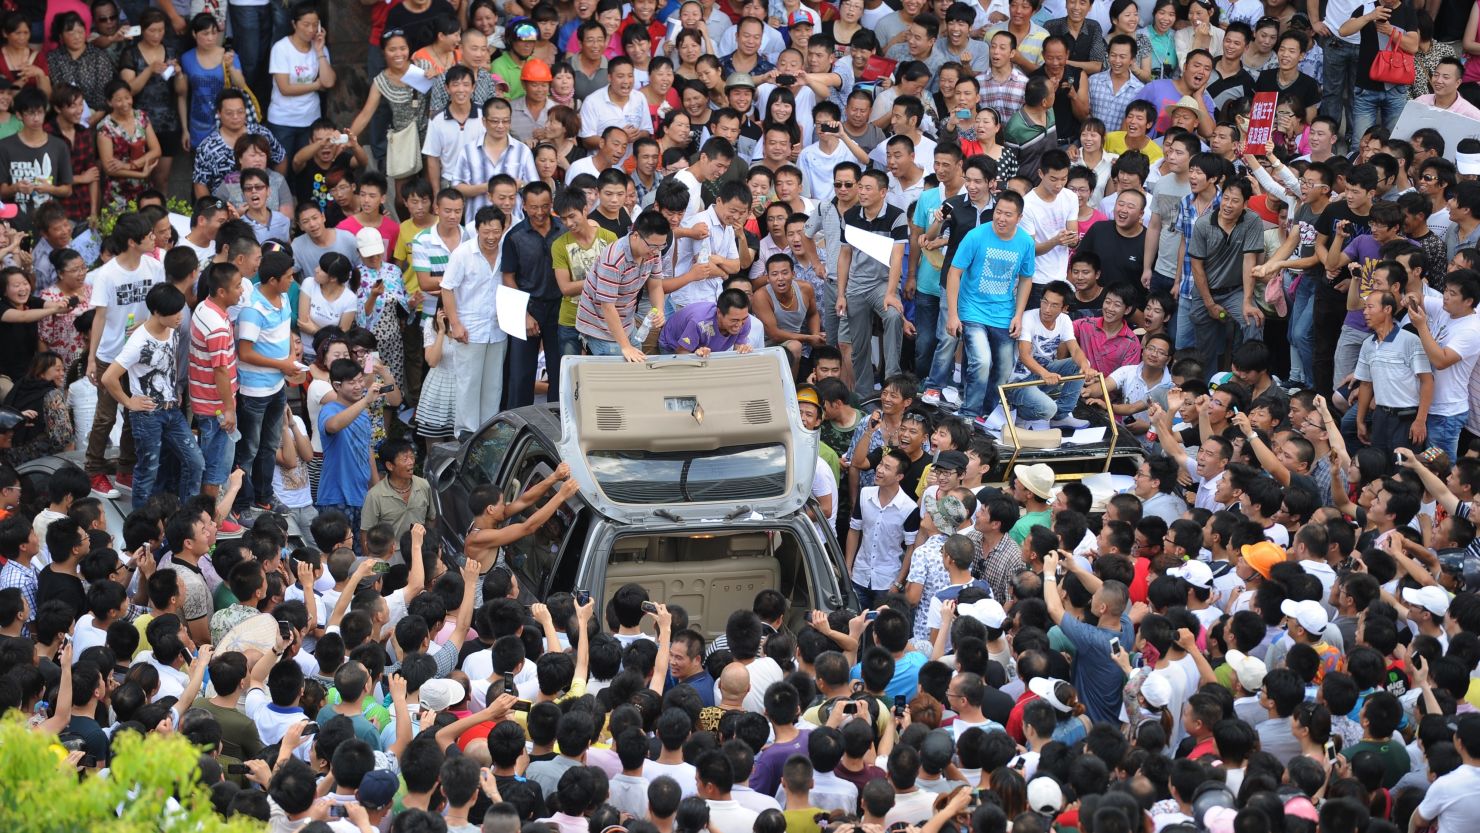 Demonstrators protesting industrial pollution destroy a car in the compound of local government offices in Qidong, China.